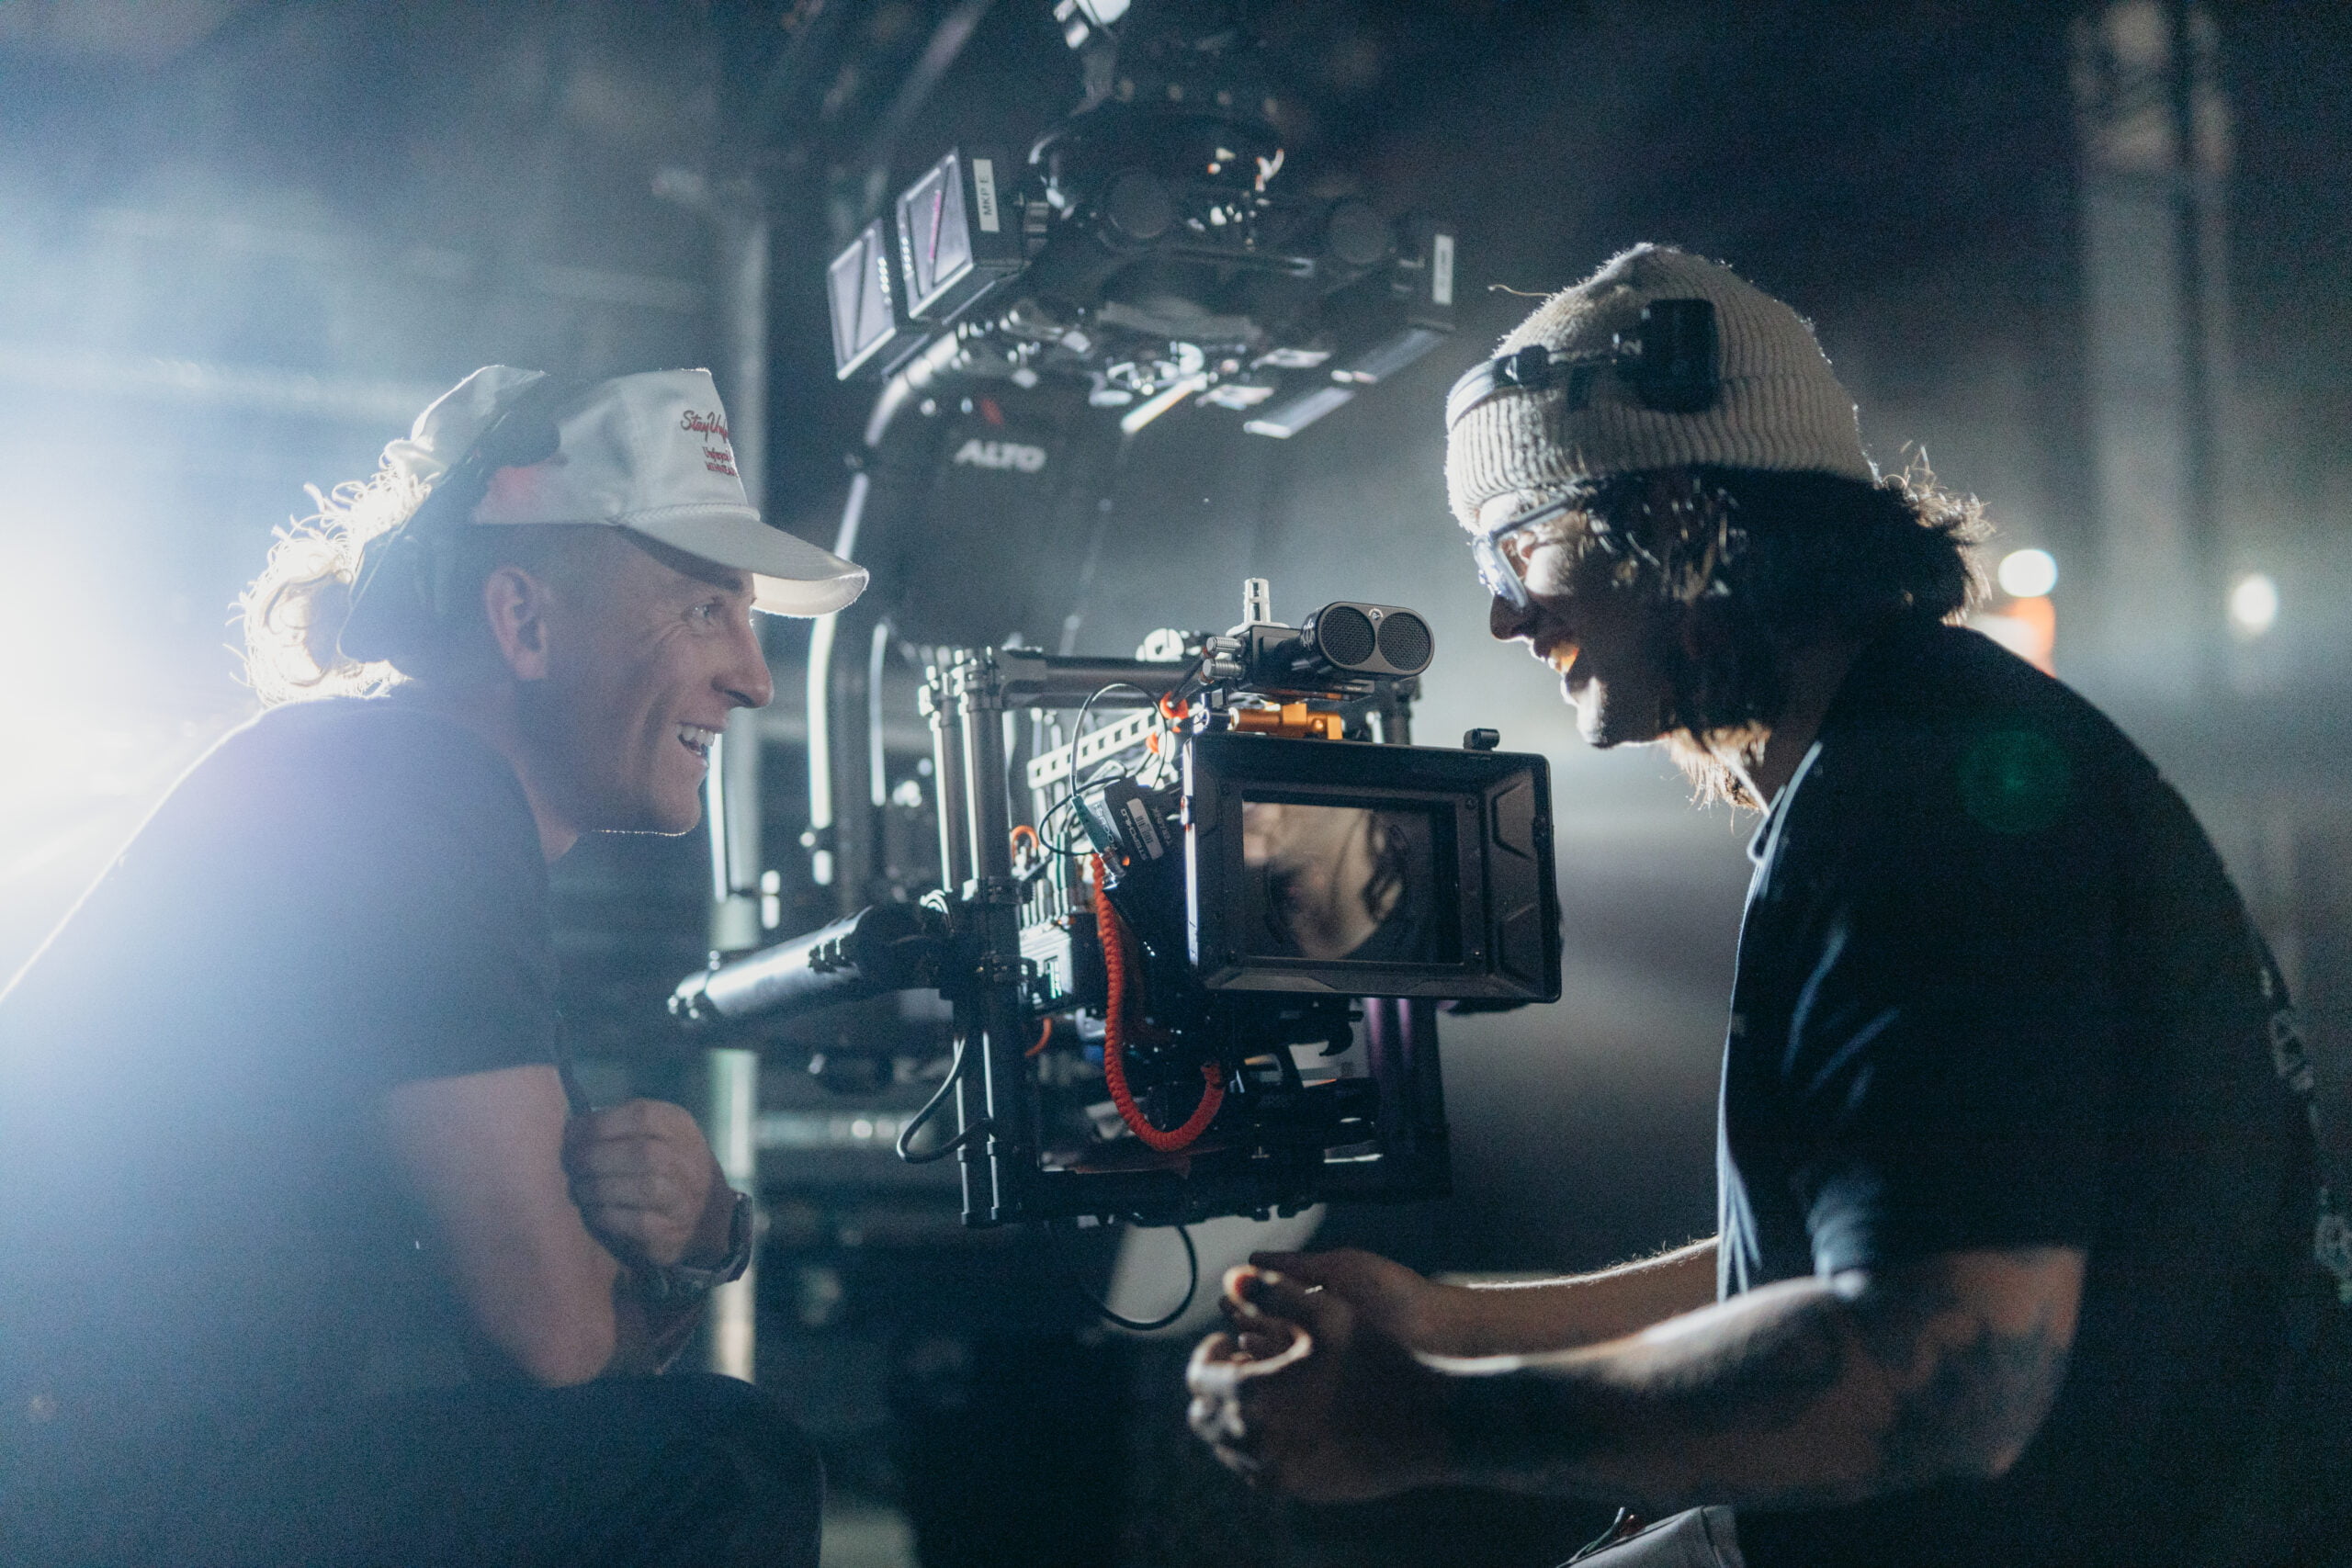 DOP Mason K. Prendergast (left) and 1st AC Giuseppe LoTempio (right) in conversation on the set of “Alto Visuals”.